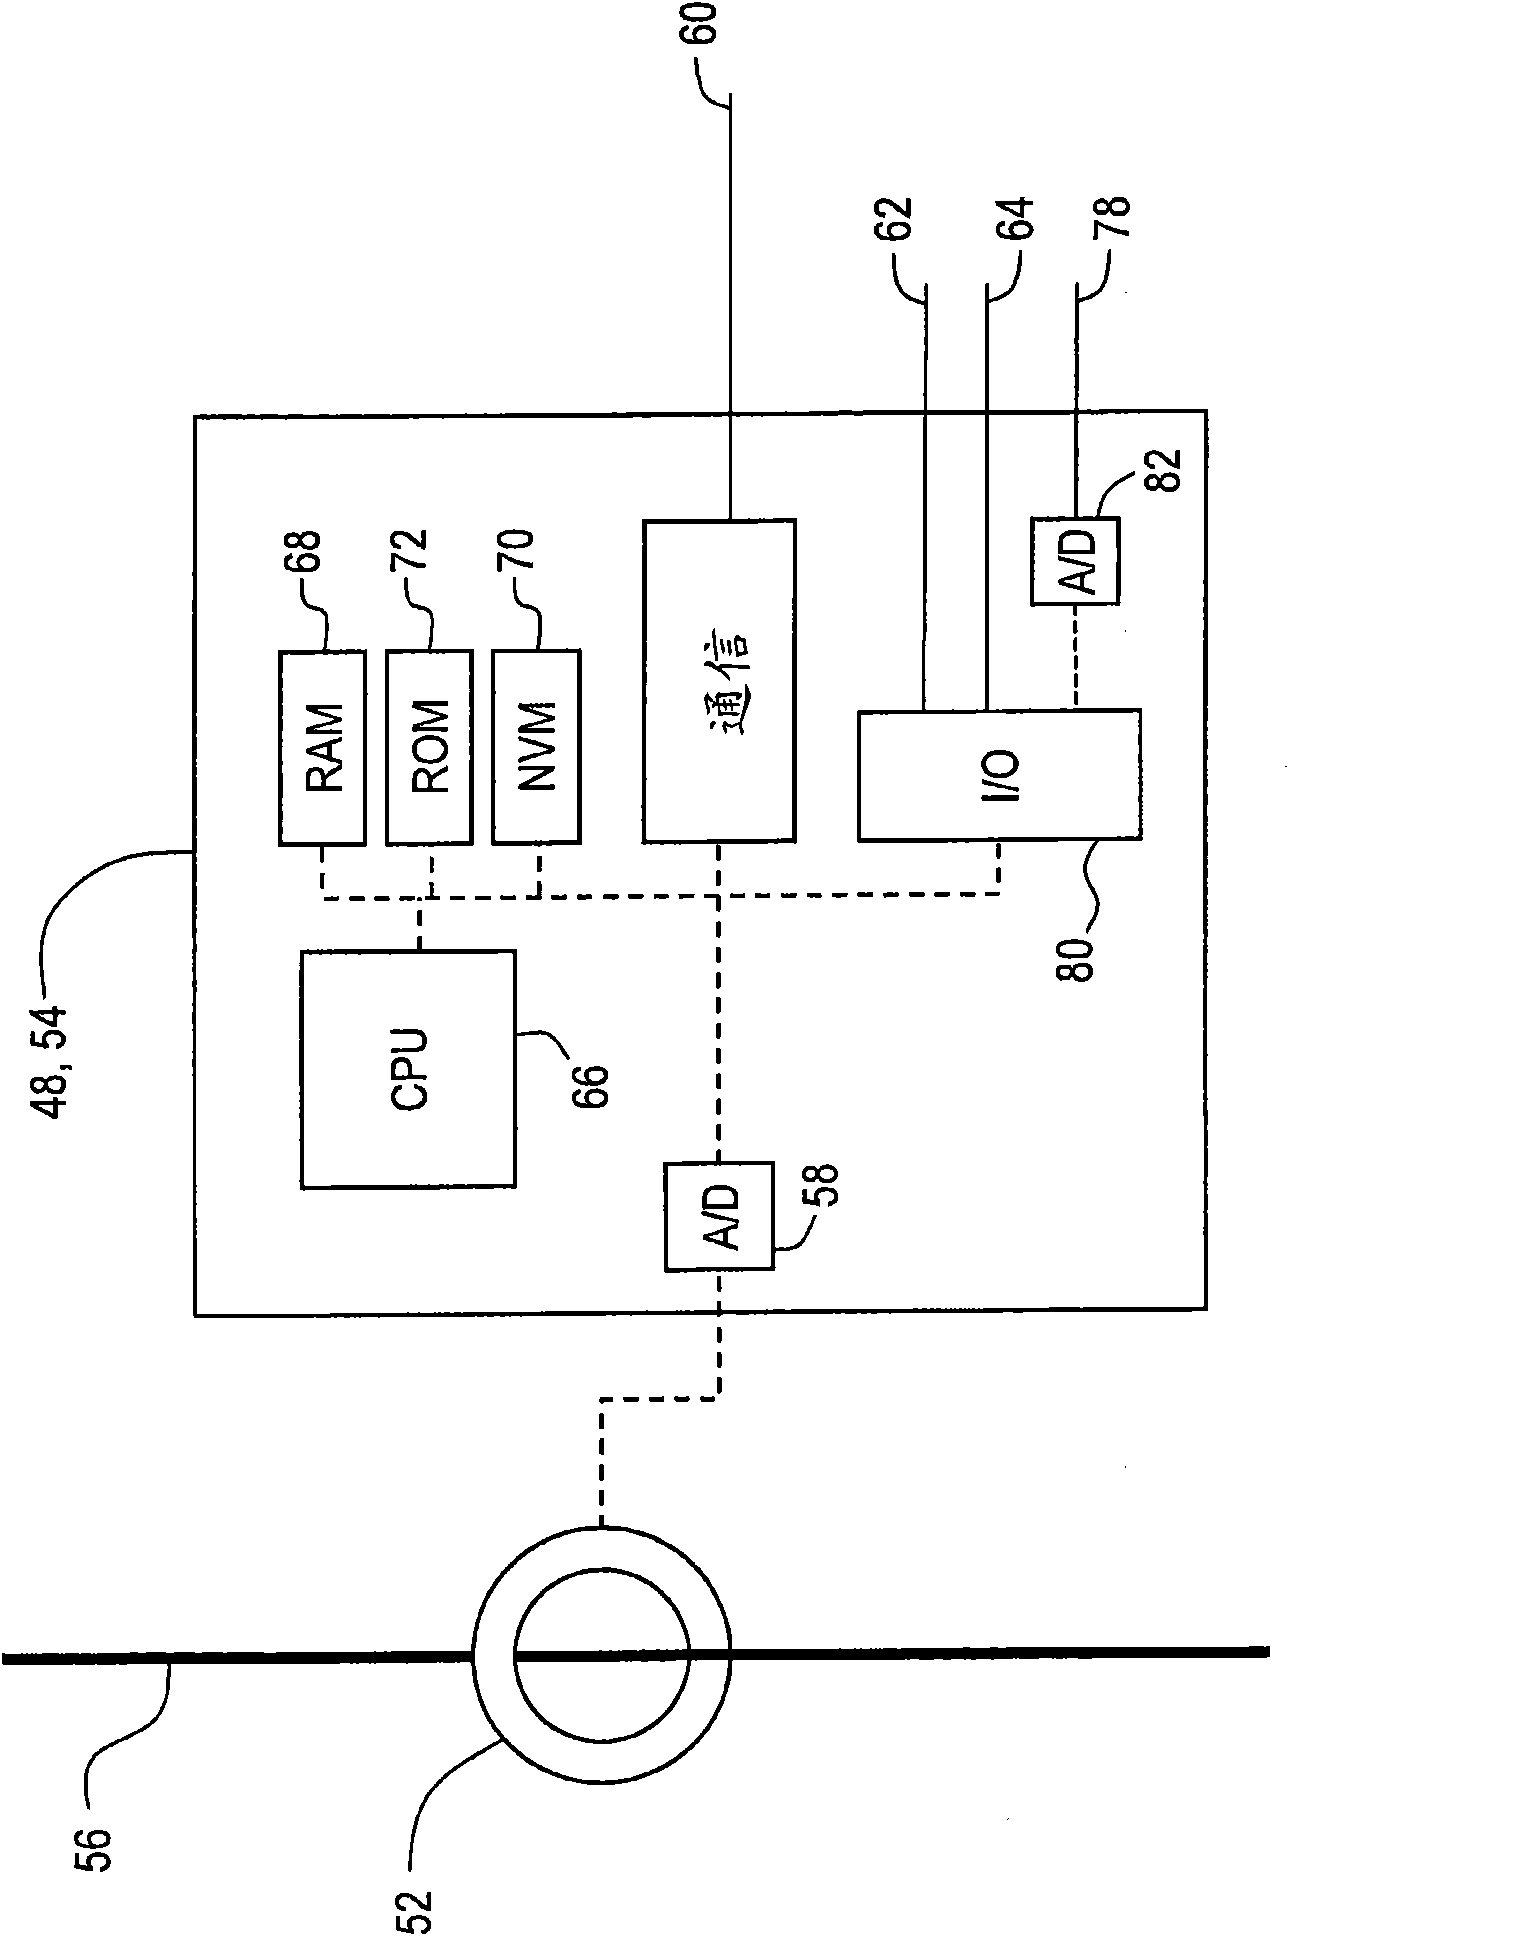 Circuit breaker having seperate restrained and unrestrained zone selective interlock setting capability